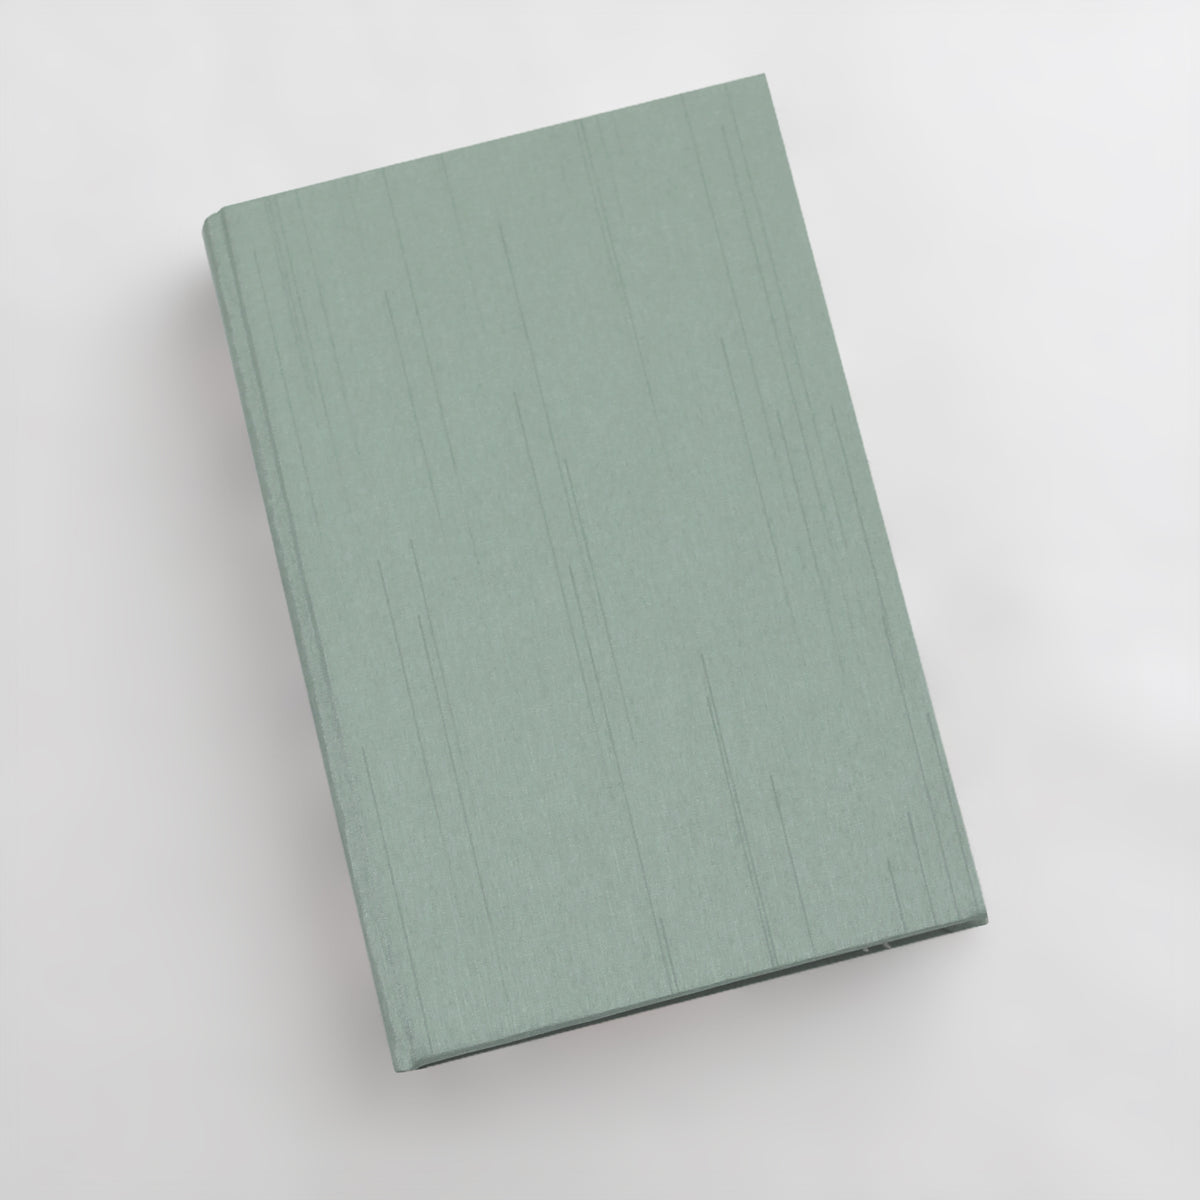 Medium 5.5x8.5 Blank Page Journal | Cover: Misty Blue Silk | Available Personalized